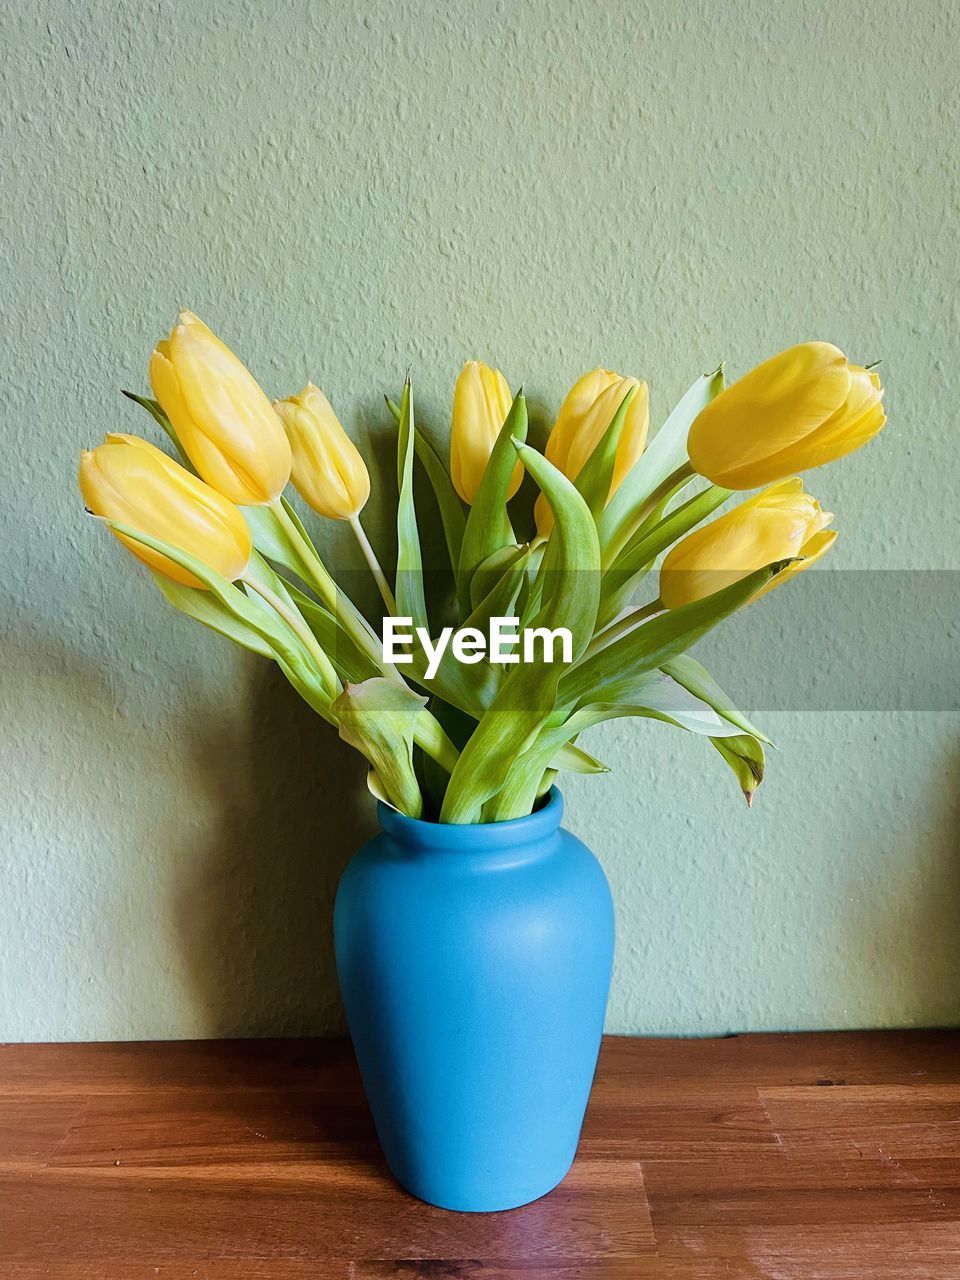 plant, flower, yellow, flowering plant, indoors, vase, freshness, nature, no people, wall - building feature, table, beauty in nature, close-up, bouquet, fragility, flowerpot, cut flowers, wood, still life, flower head, home interior, green, flower arrangement, decoration, floristry, bunch of flowers, arrangement